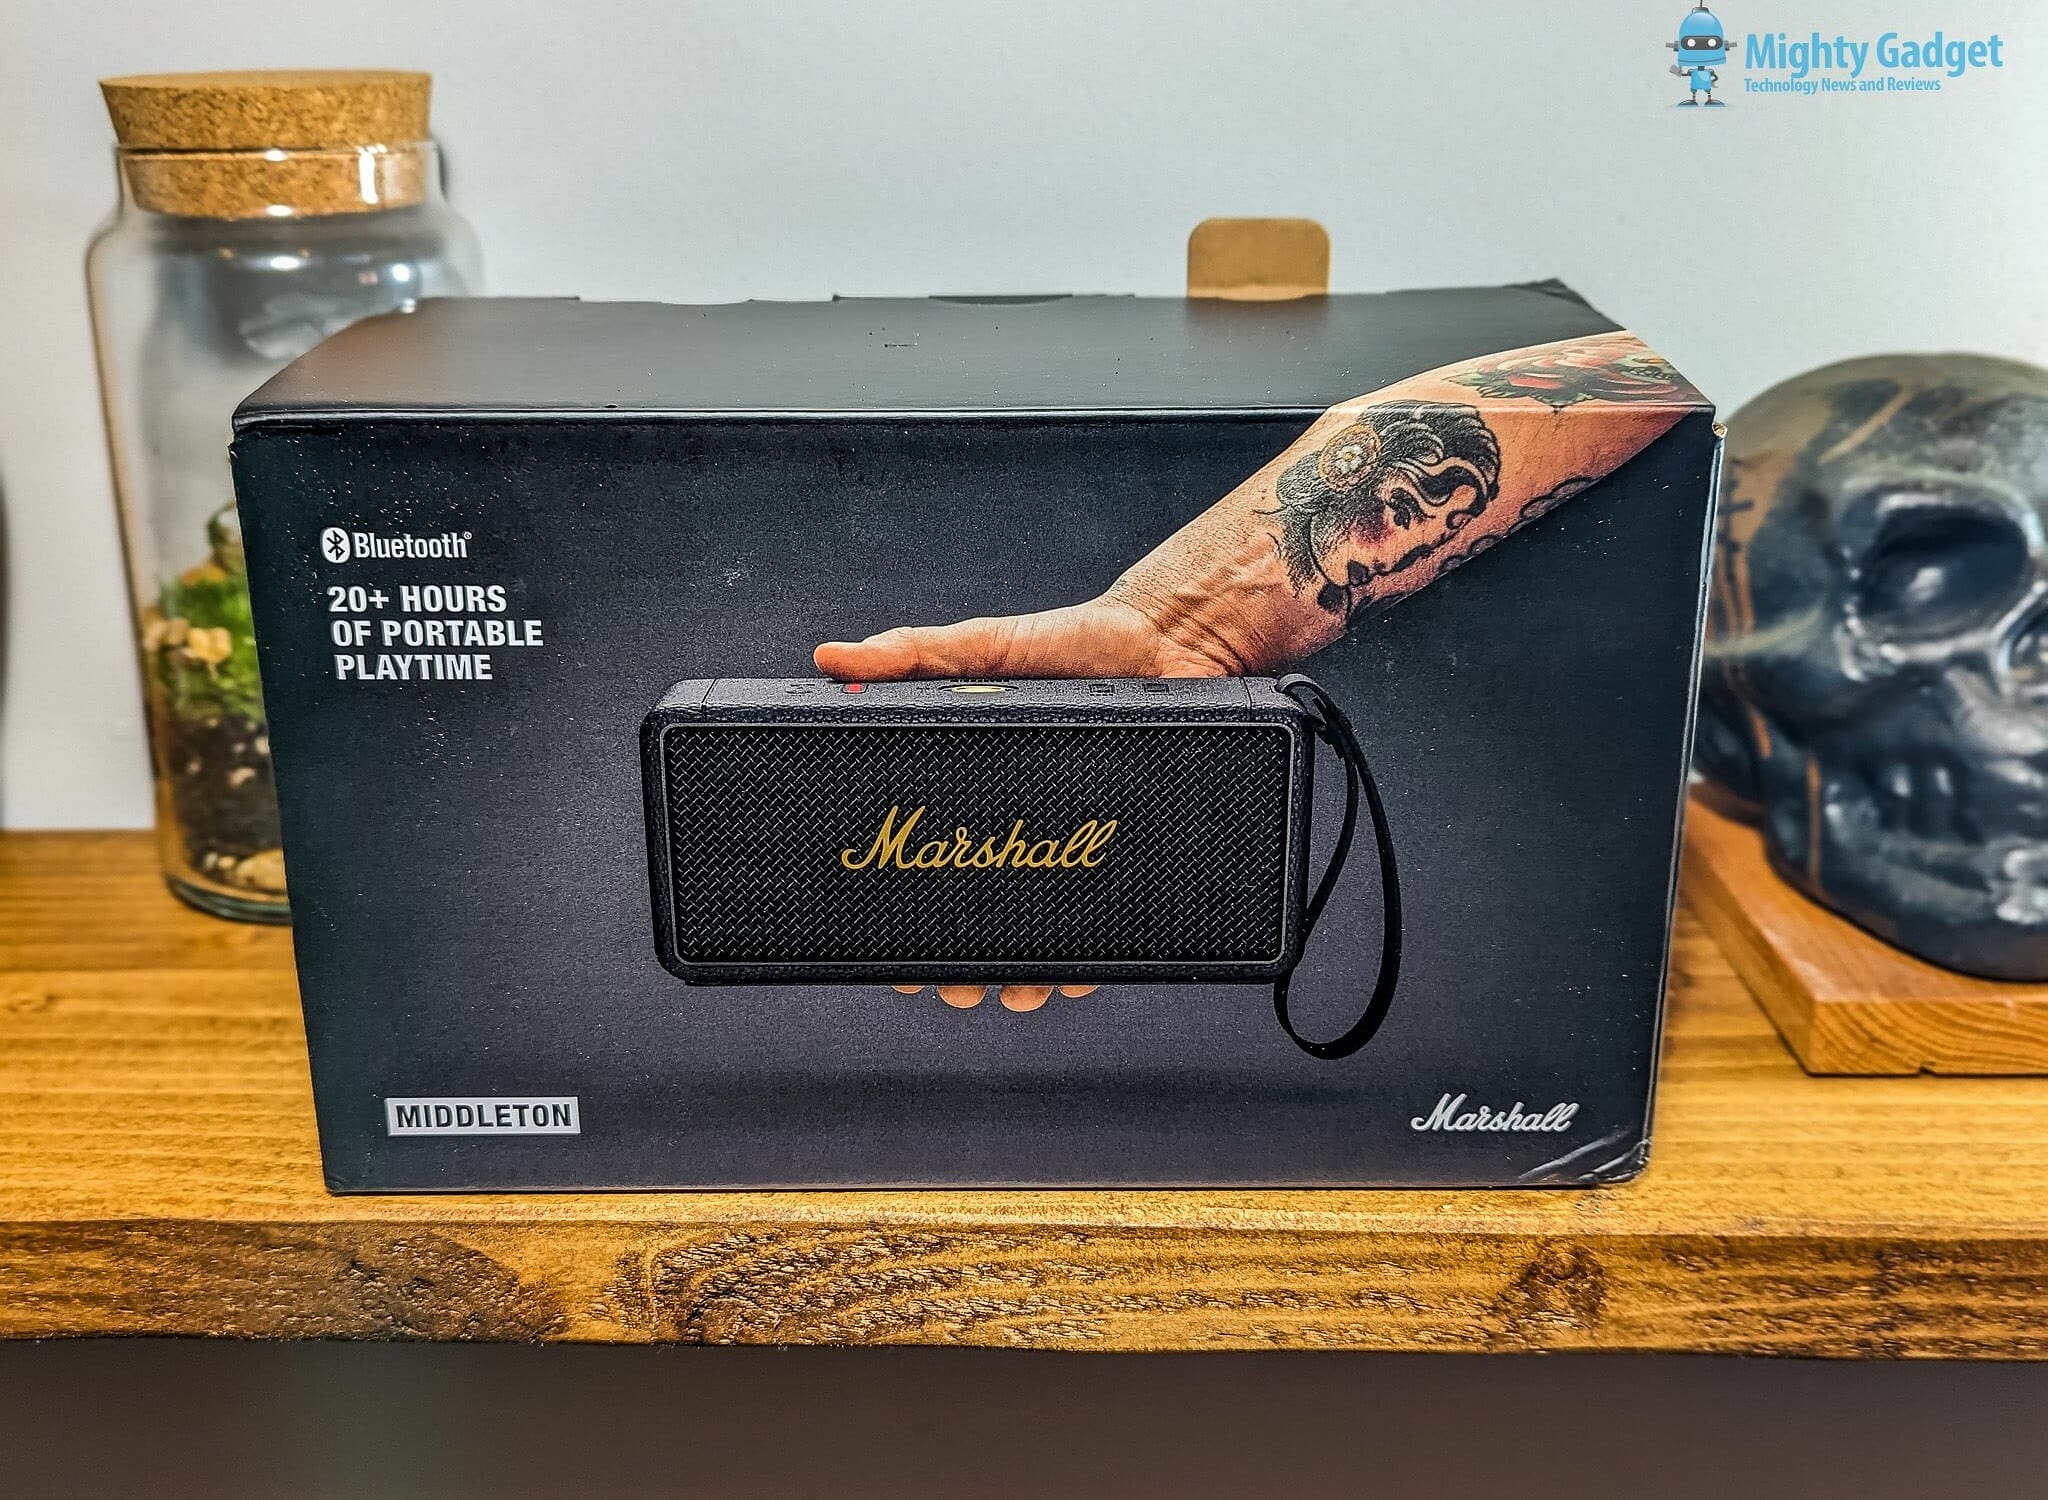 Marshall Middleton Bluetooth Speaker Review by Mighty Gadget Feature